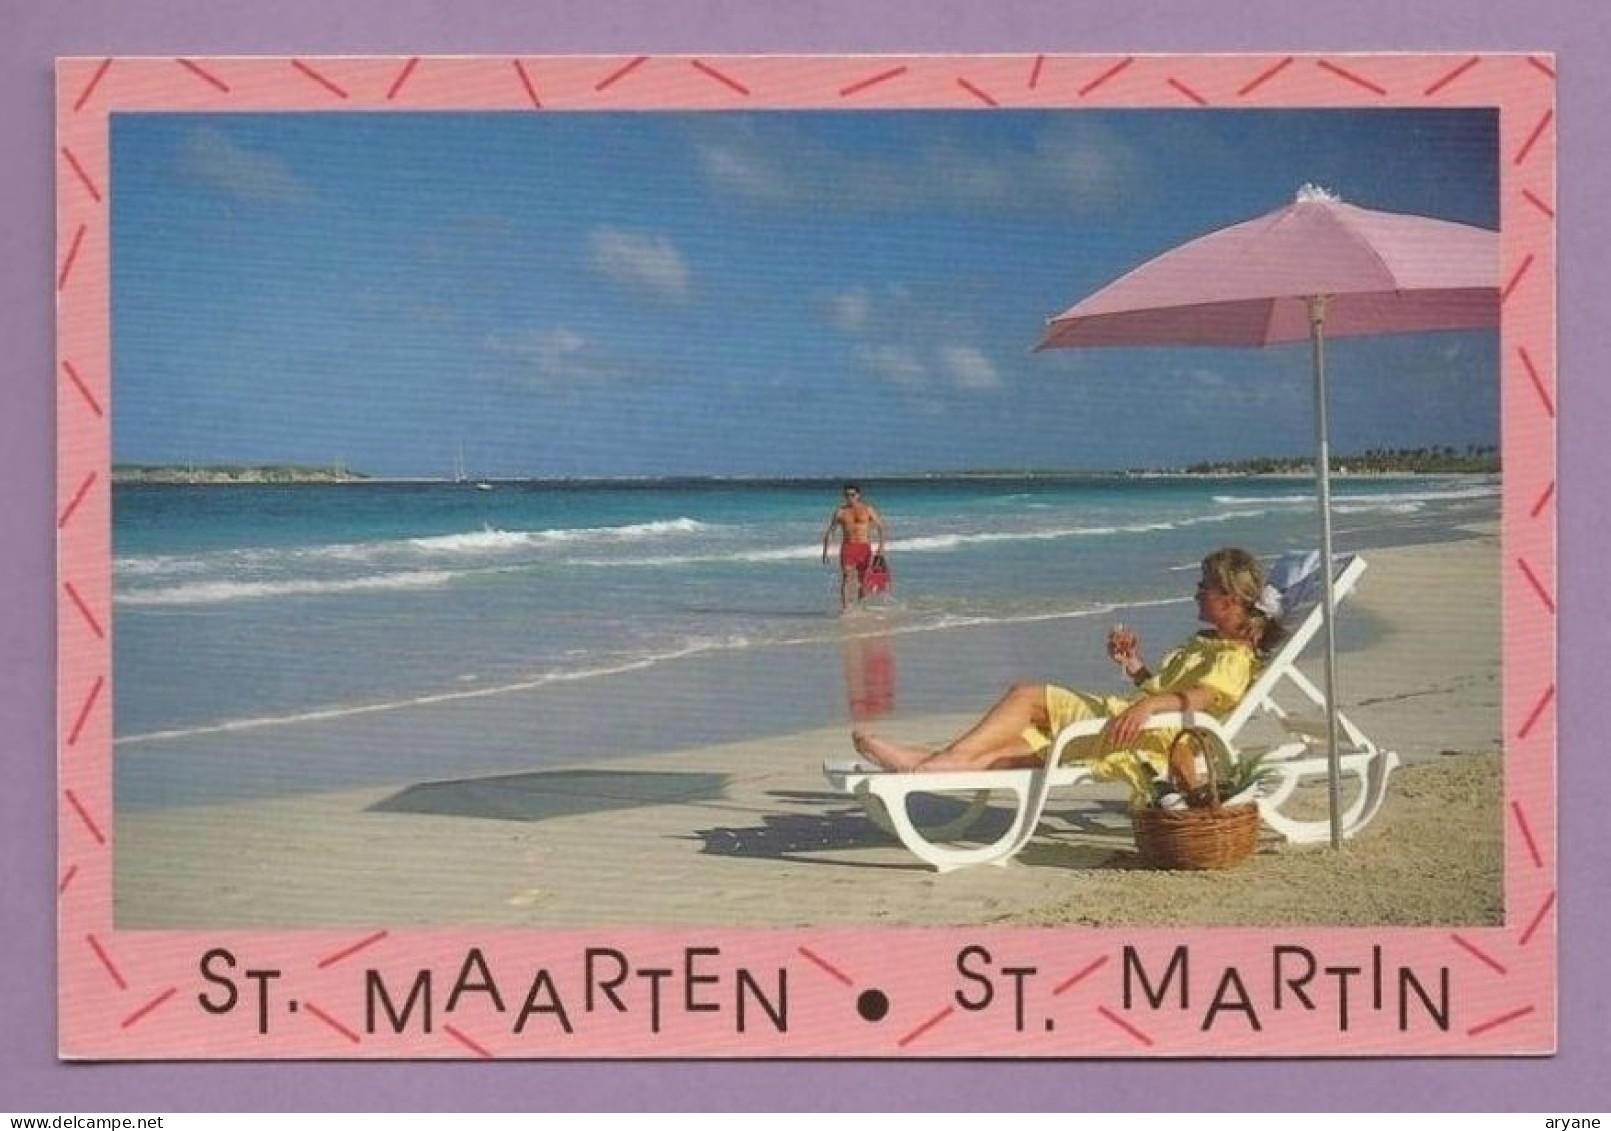 1392- CPM - ANTILLES - GUADELOUPE - St MARTIN - WEST INDIES - Relaxing On ORIENT BEACH - 2 - Saint Martin